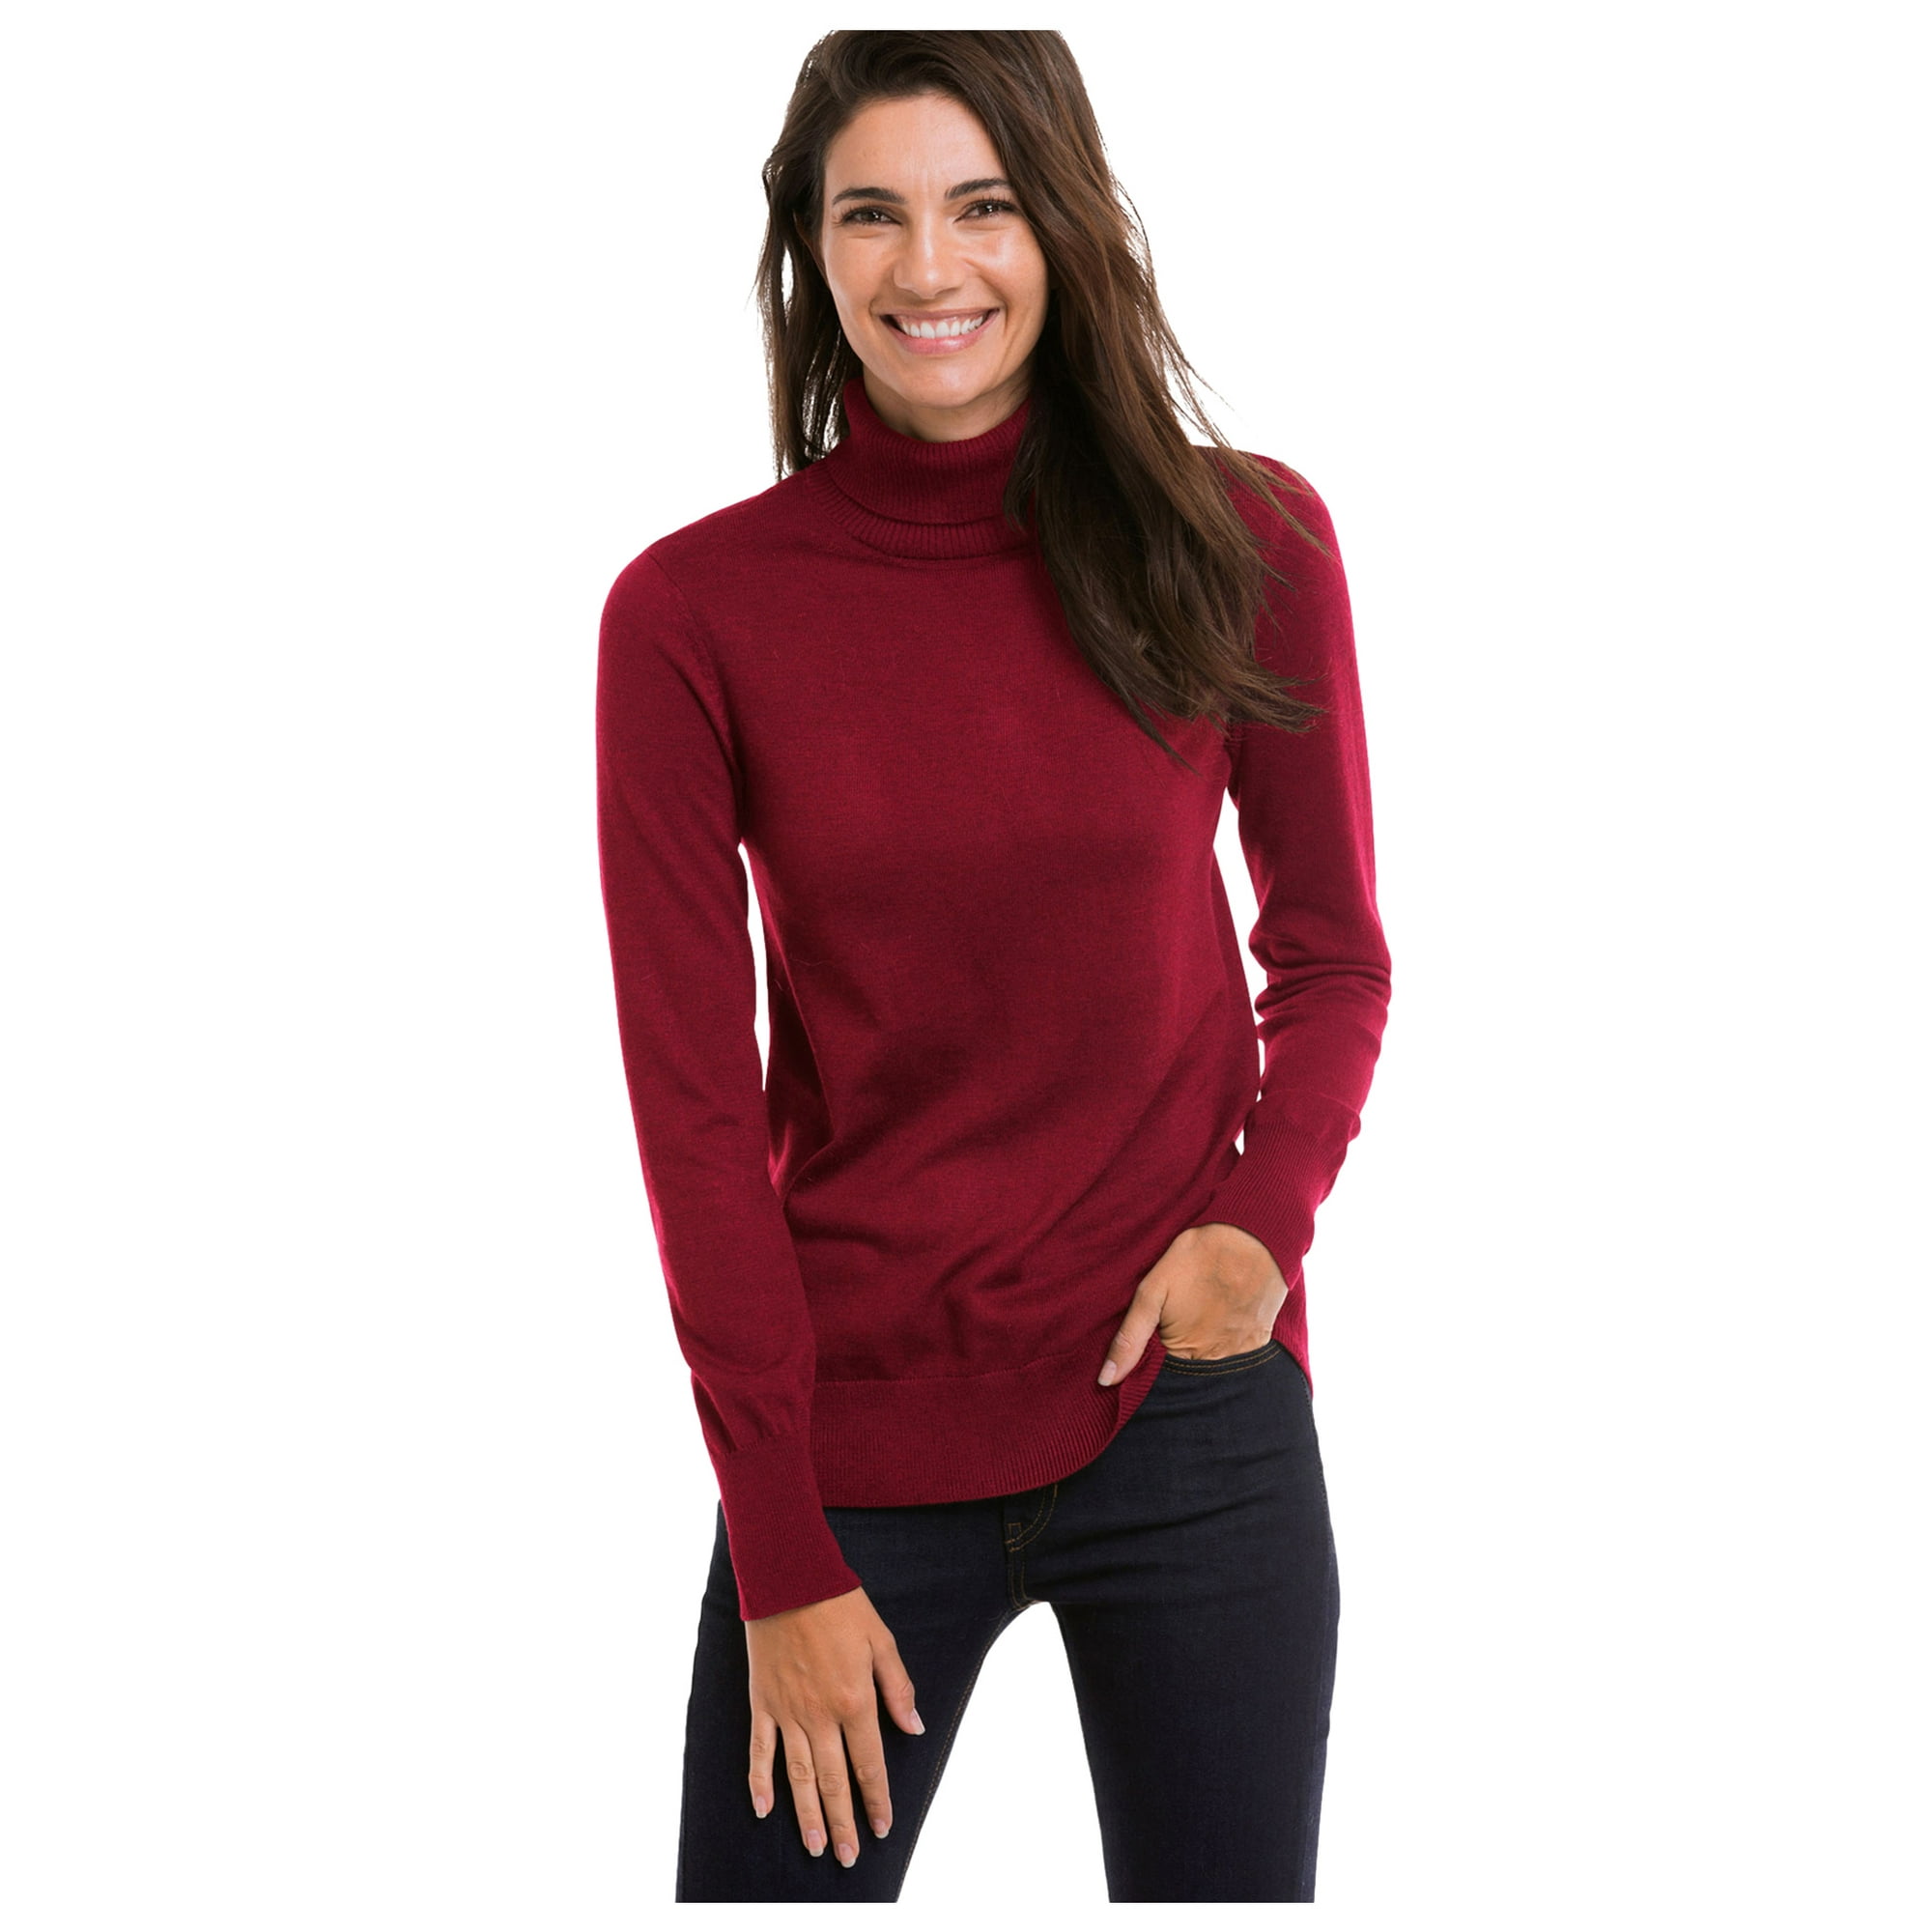 Knitwear Collection for Women